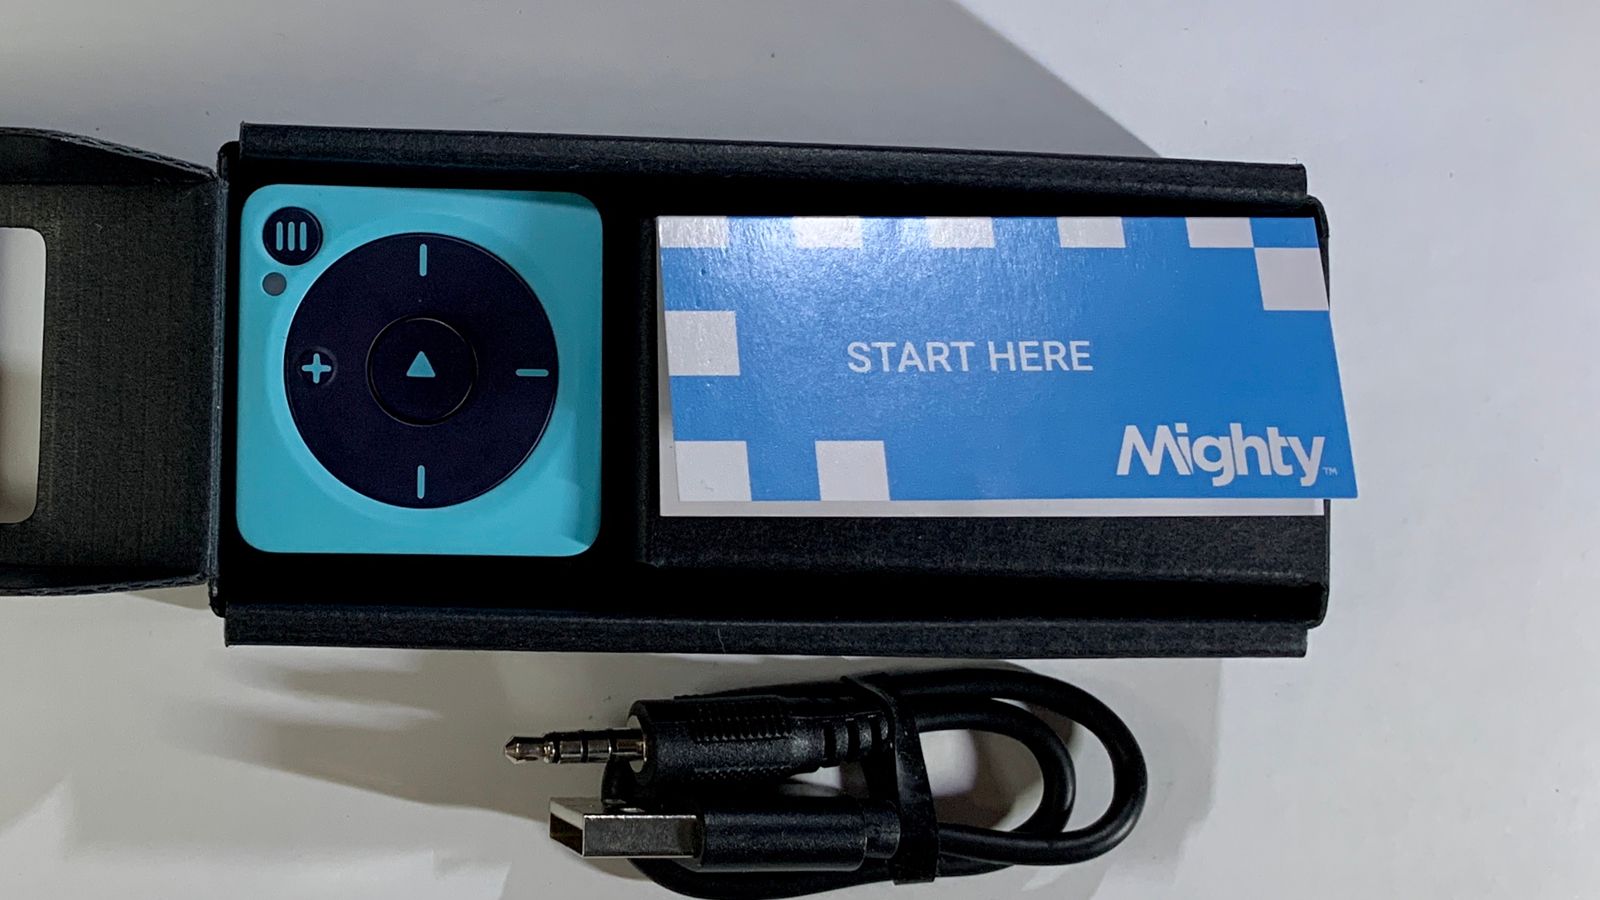 The Mighty Vibe player in its box with the &quot;Start Here&quot; booklet next to the charging cable